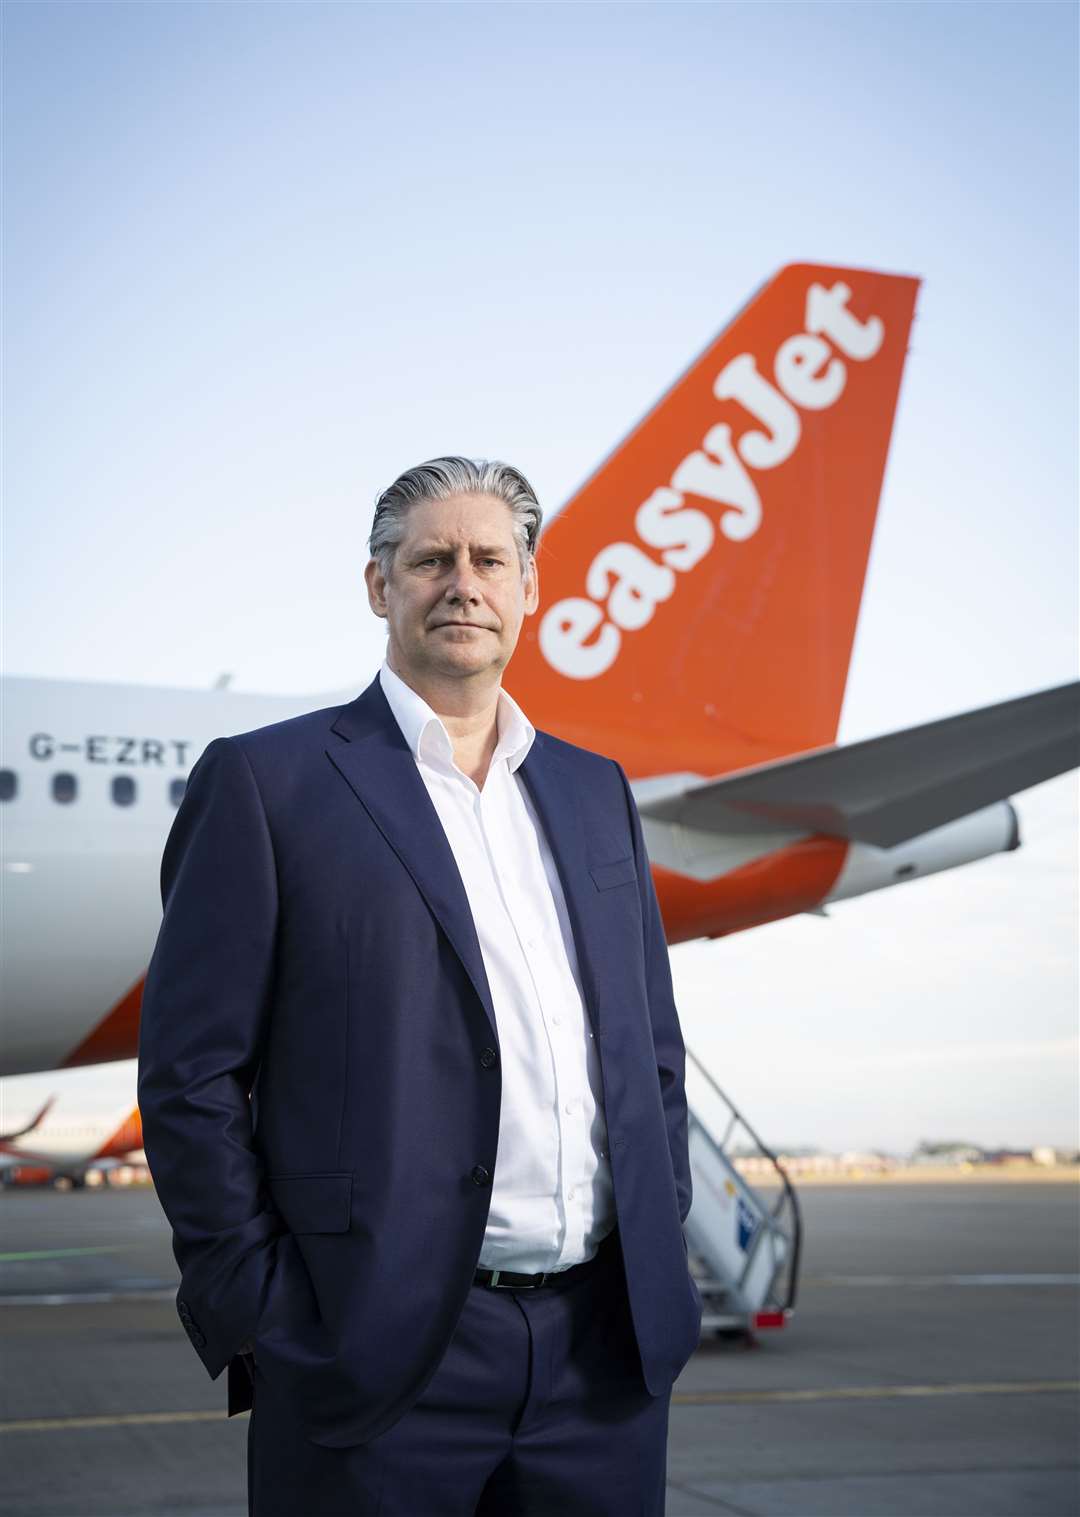 EasyJet chief executive Johan Lundgren said he expects testing for travel to ‘soon become a thing of the past’ (Matt Alexander/PA)